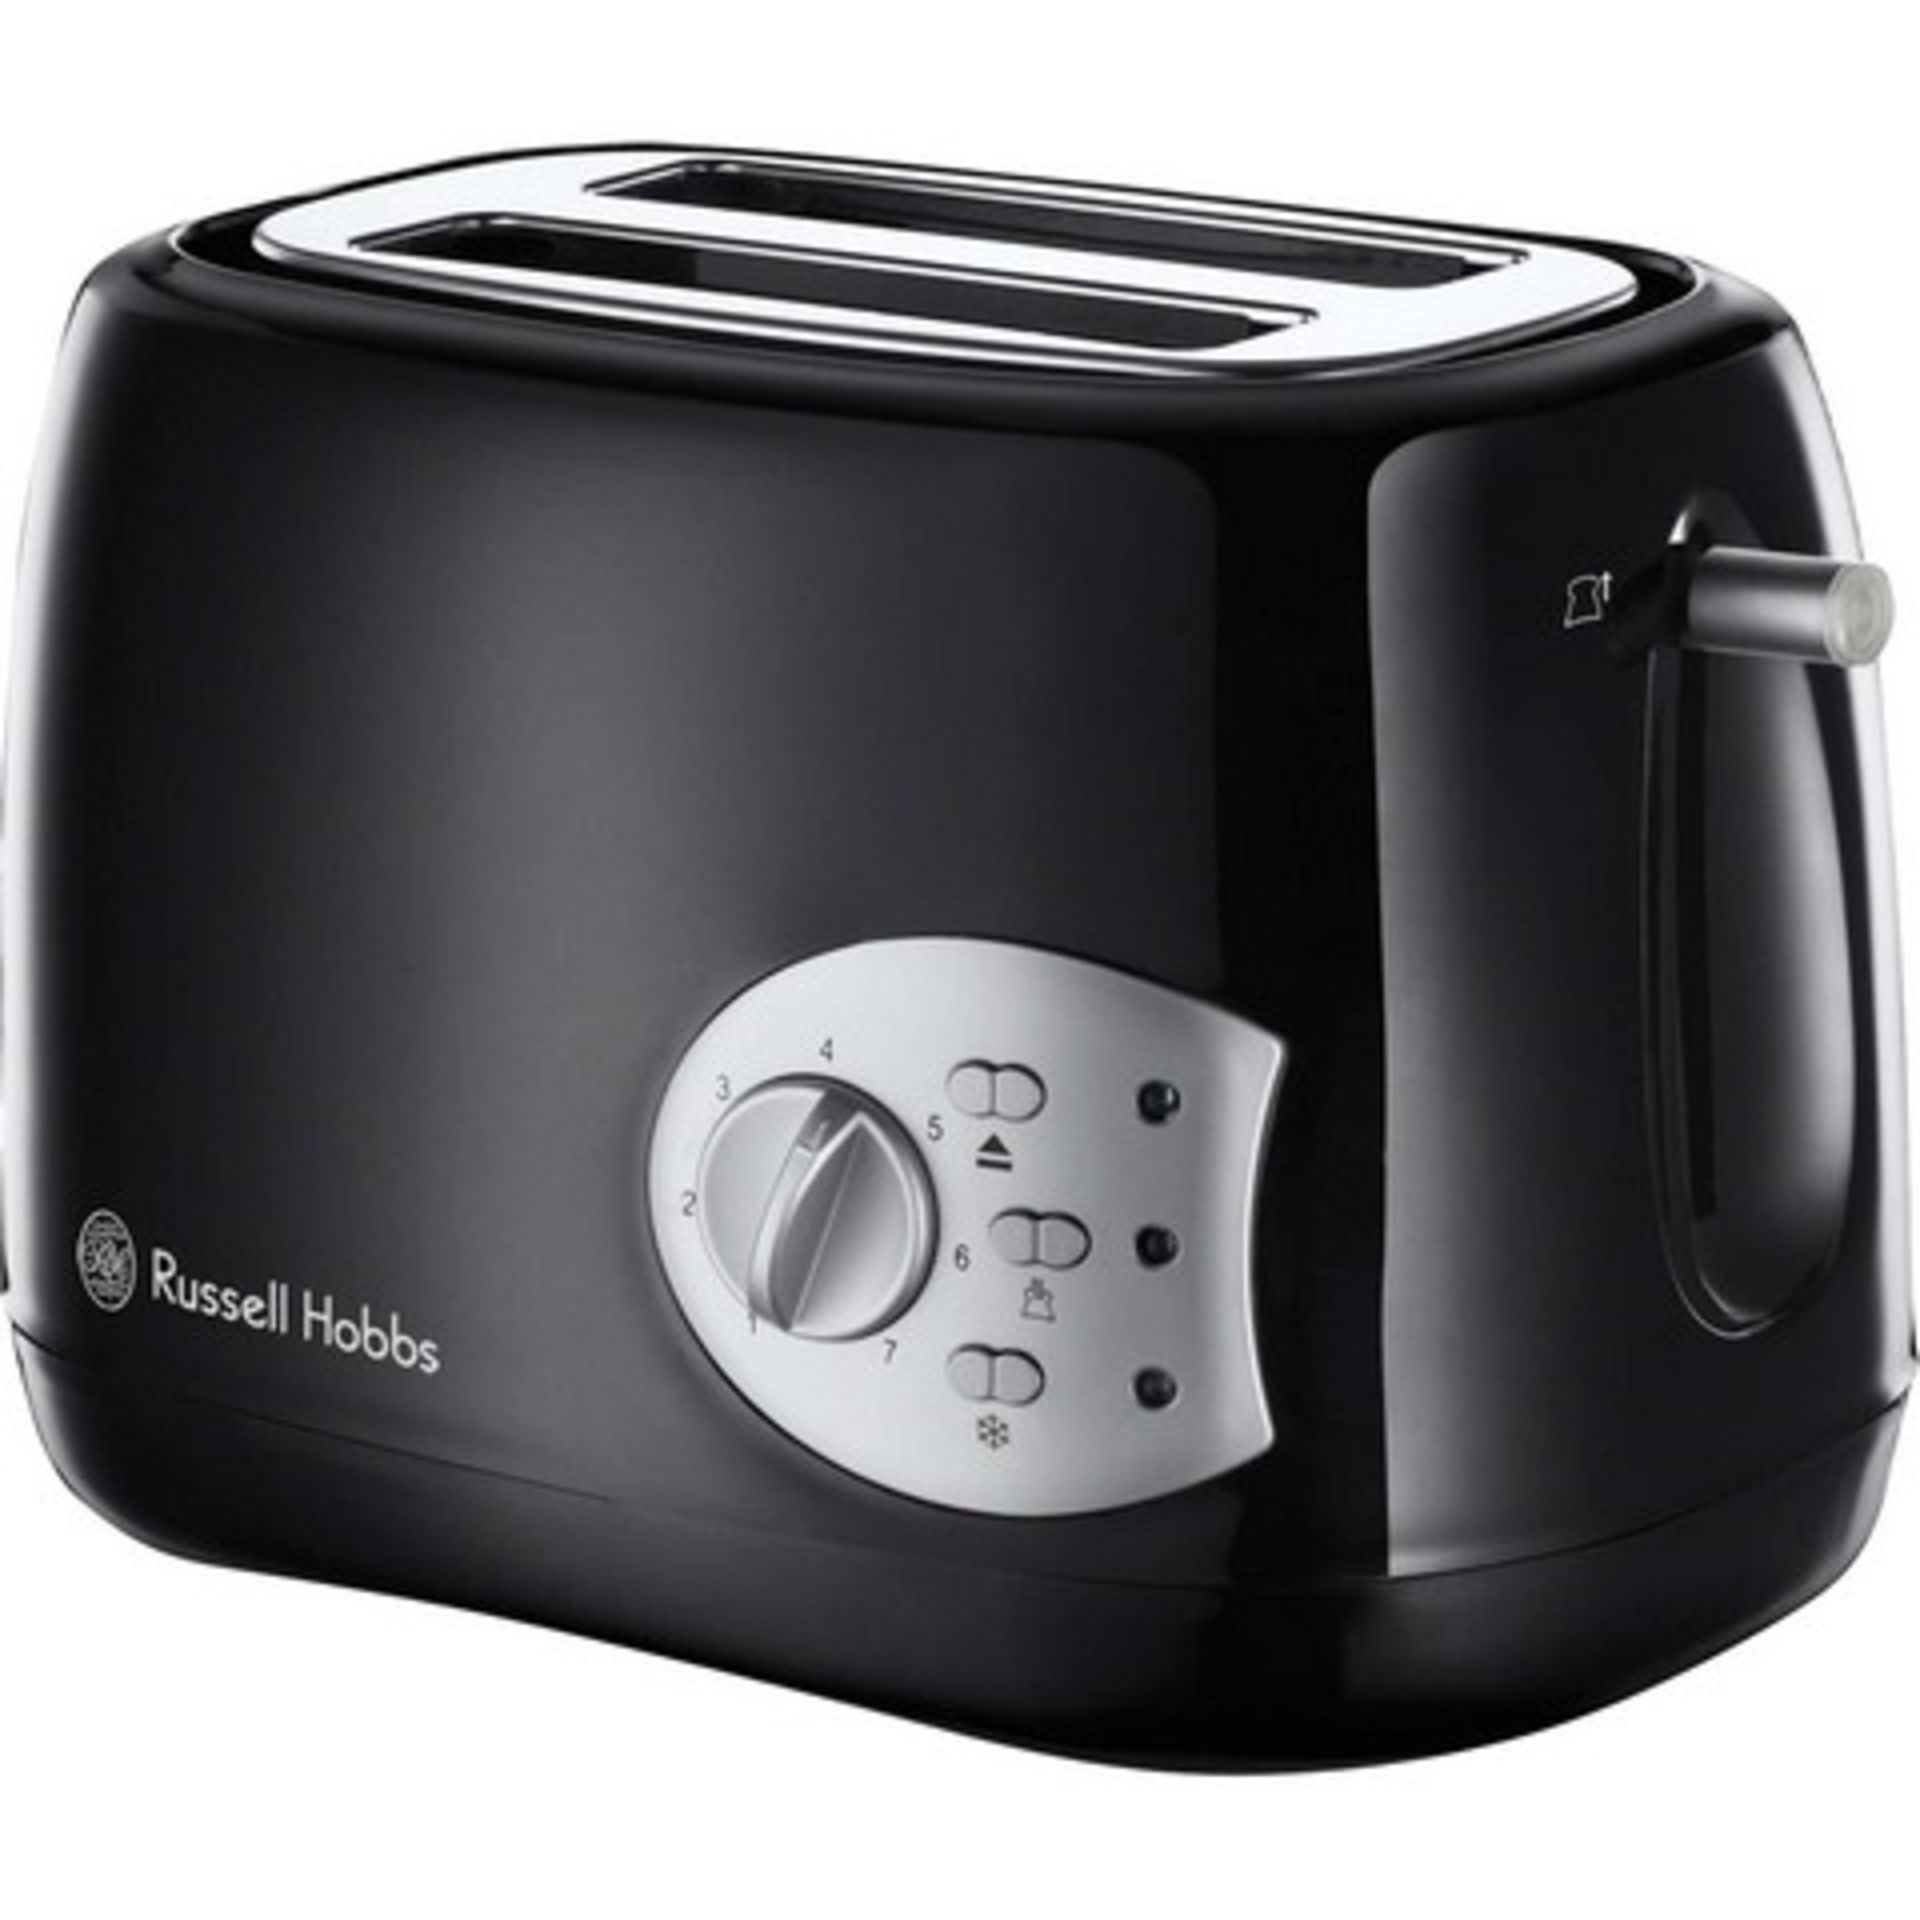 + VAT Brand New Russell Hobbs Two Slice Toaster - With Reheat/Frozen/Cancel Features - Variable Brow